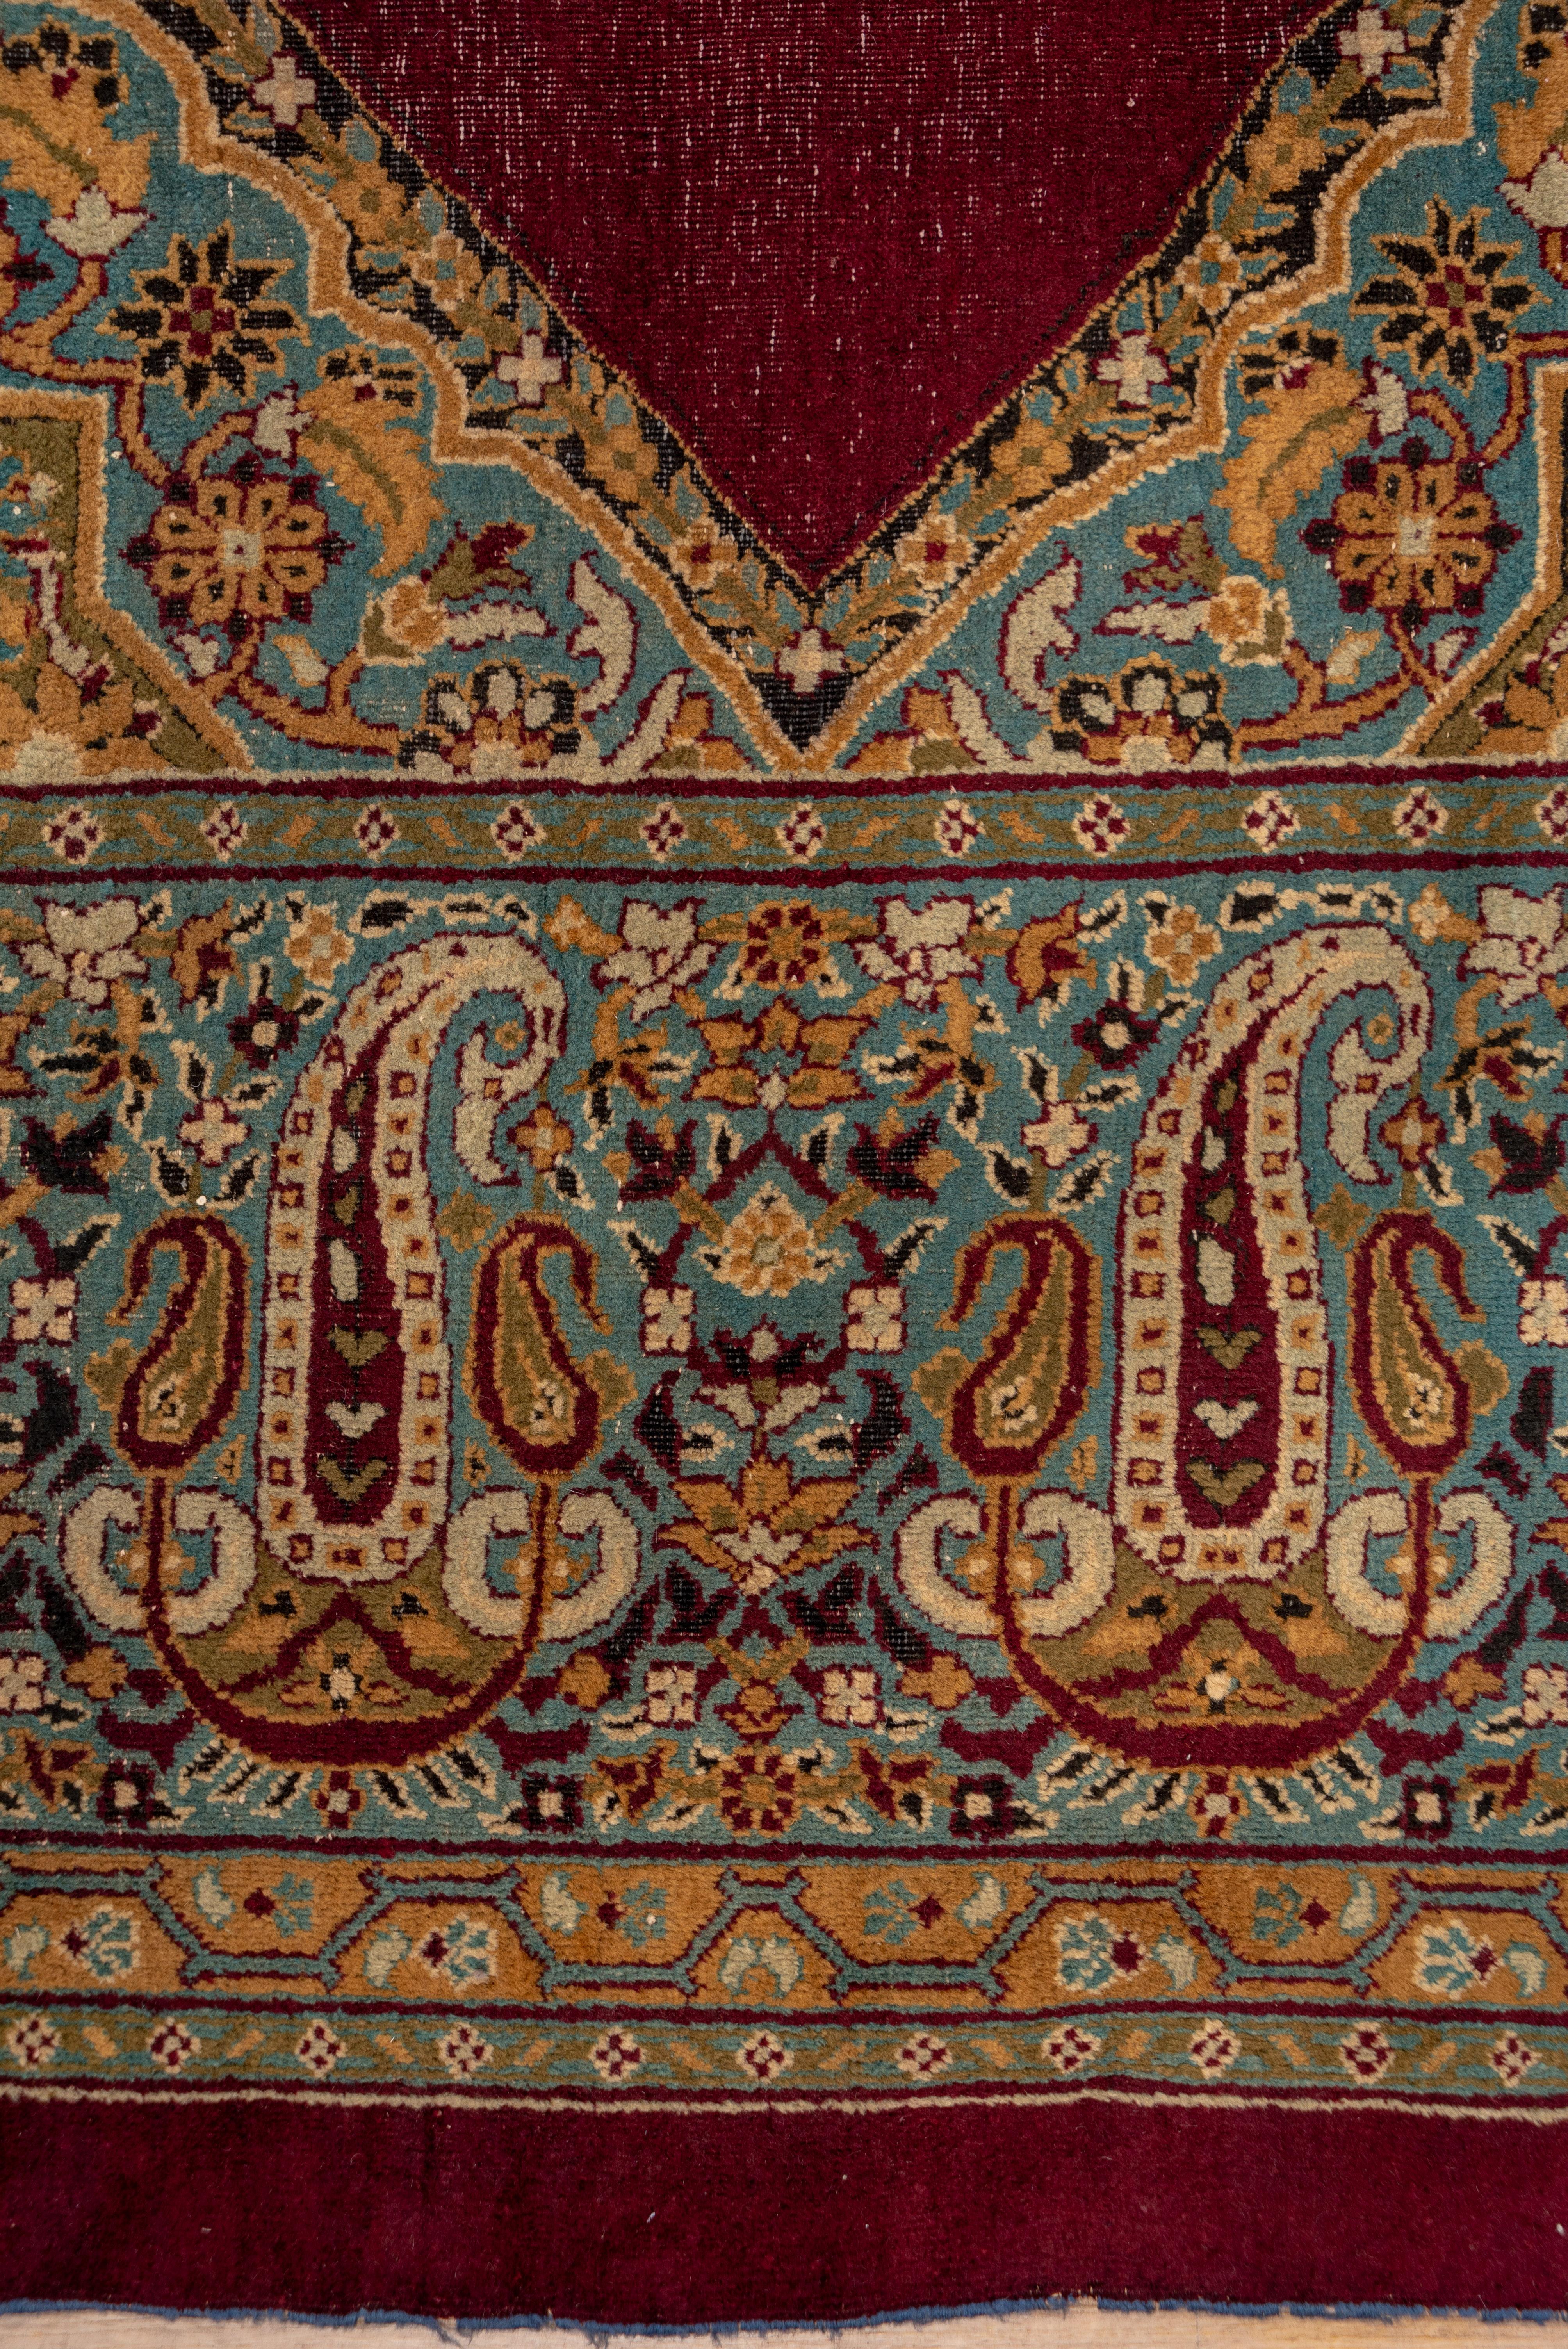 A very striking northern Indian urban carpet with a plain zig-zag burgundy field centered by a pole medallion of three red, rosette-filled conjoint diamonds with pale blue pattern en suite triangular side fillers. Ice blue border of large and small